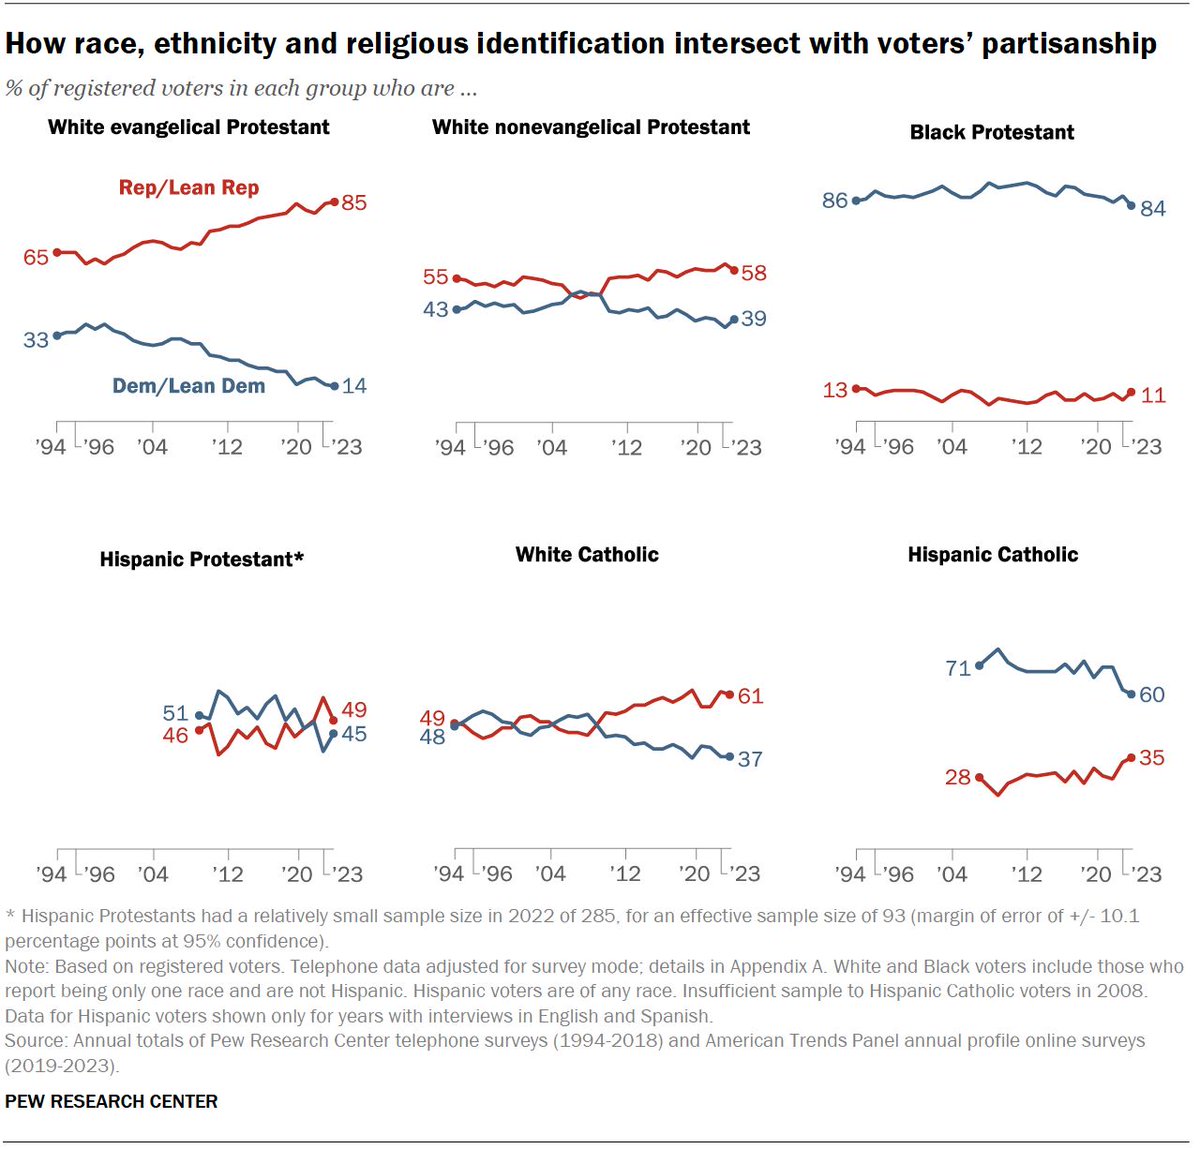 How race, ethnicity and religious identification intersect with voters’ partisanship pewrsr.ch/4aGxM5m